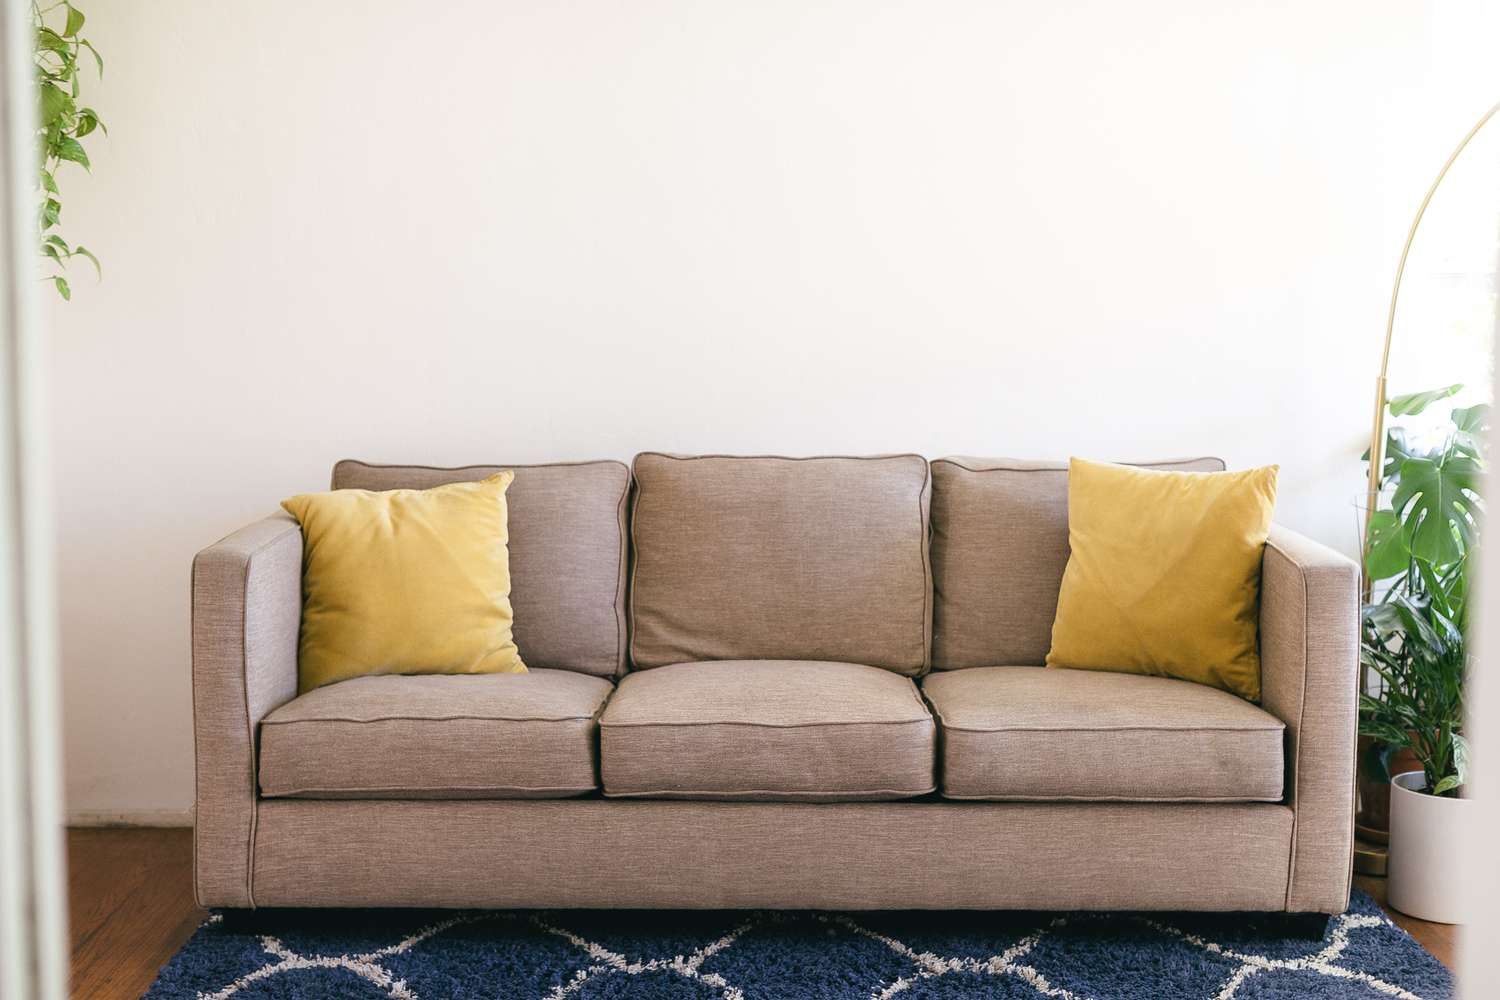 Alternative Seating Options to a Couch